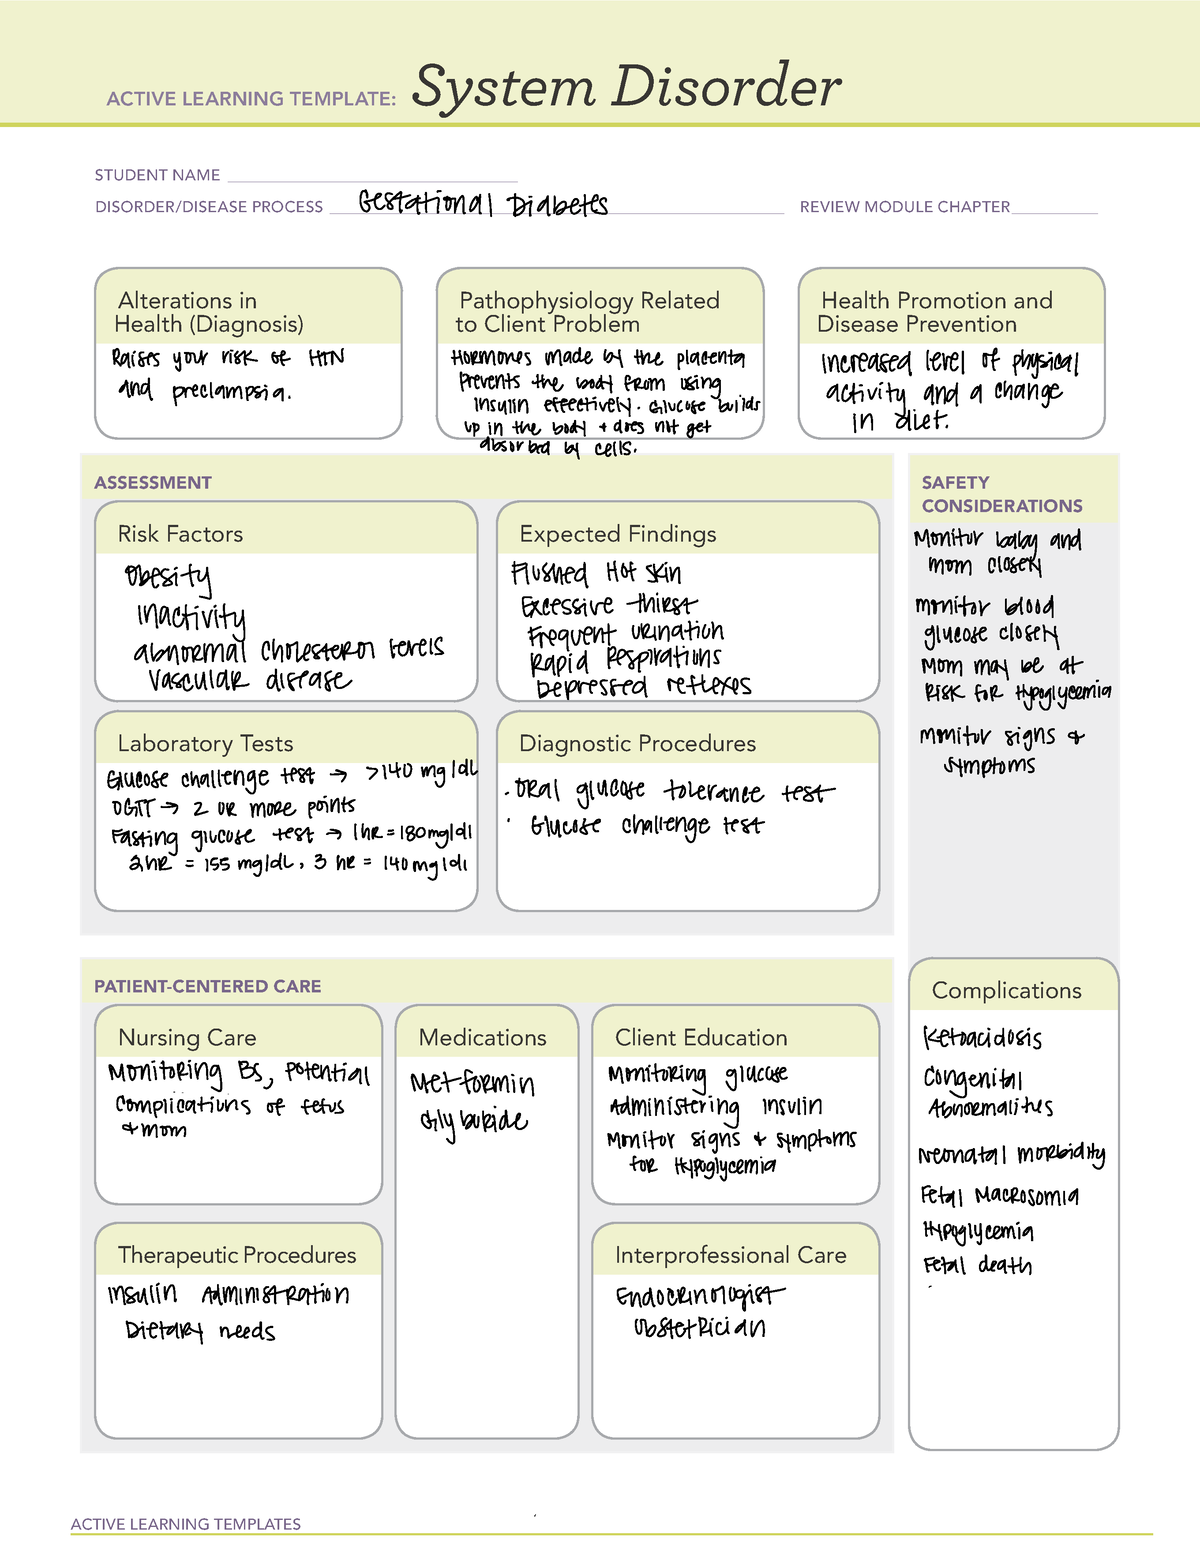 system-disorder-active-learning-templates-system-disorder-student